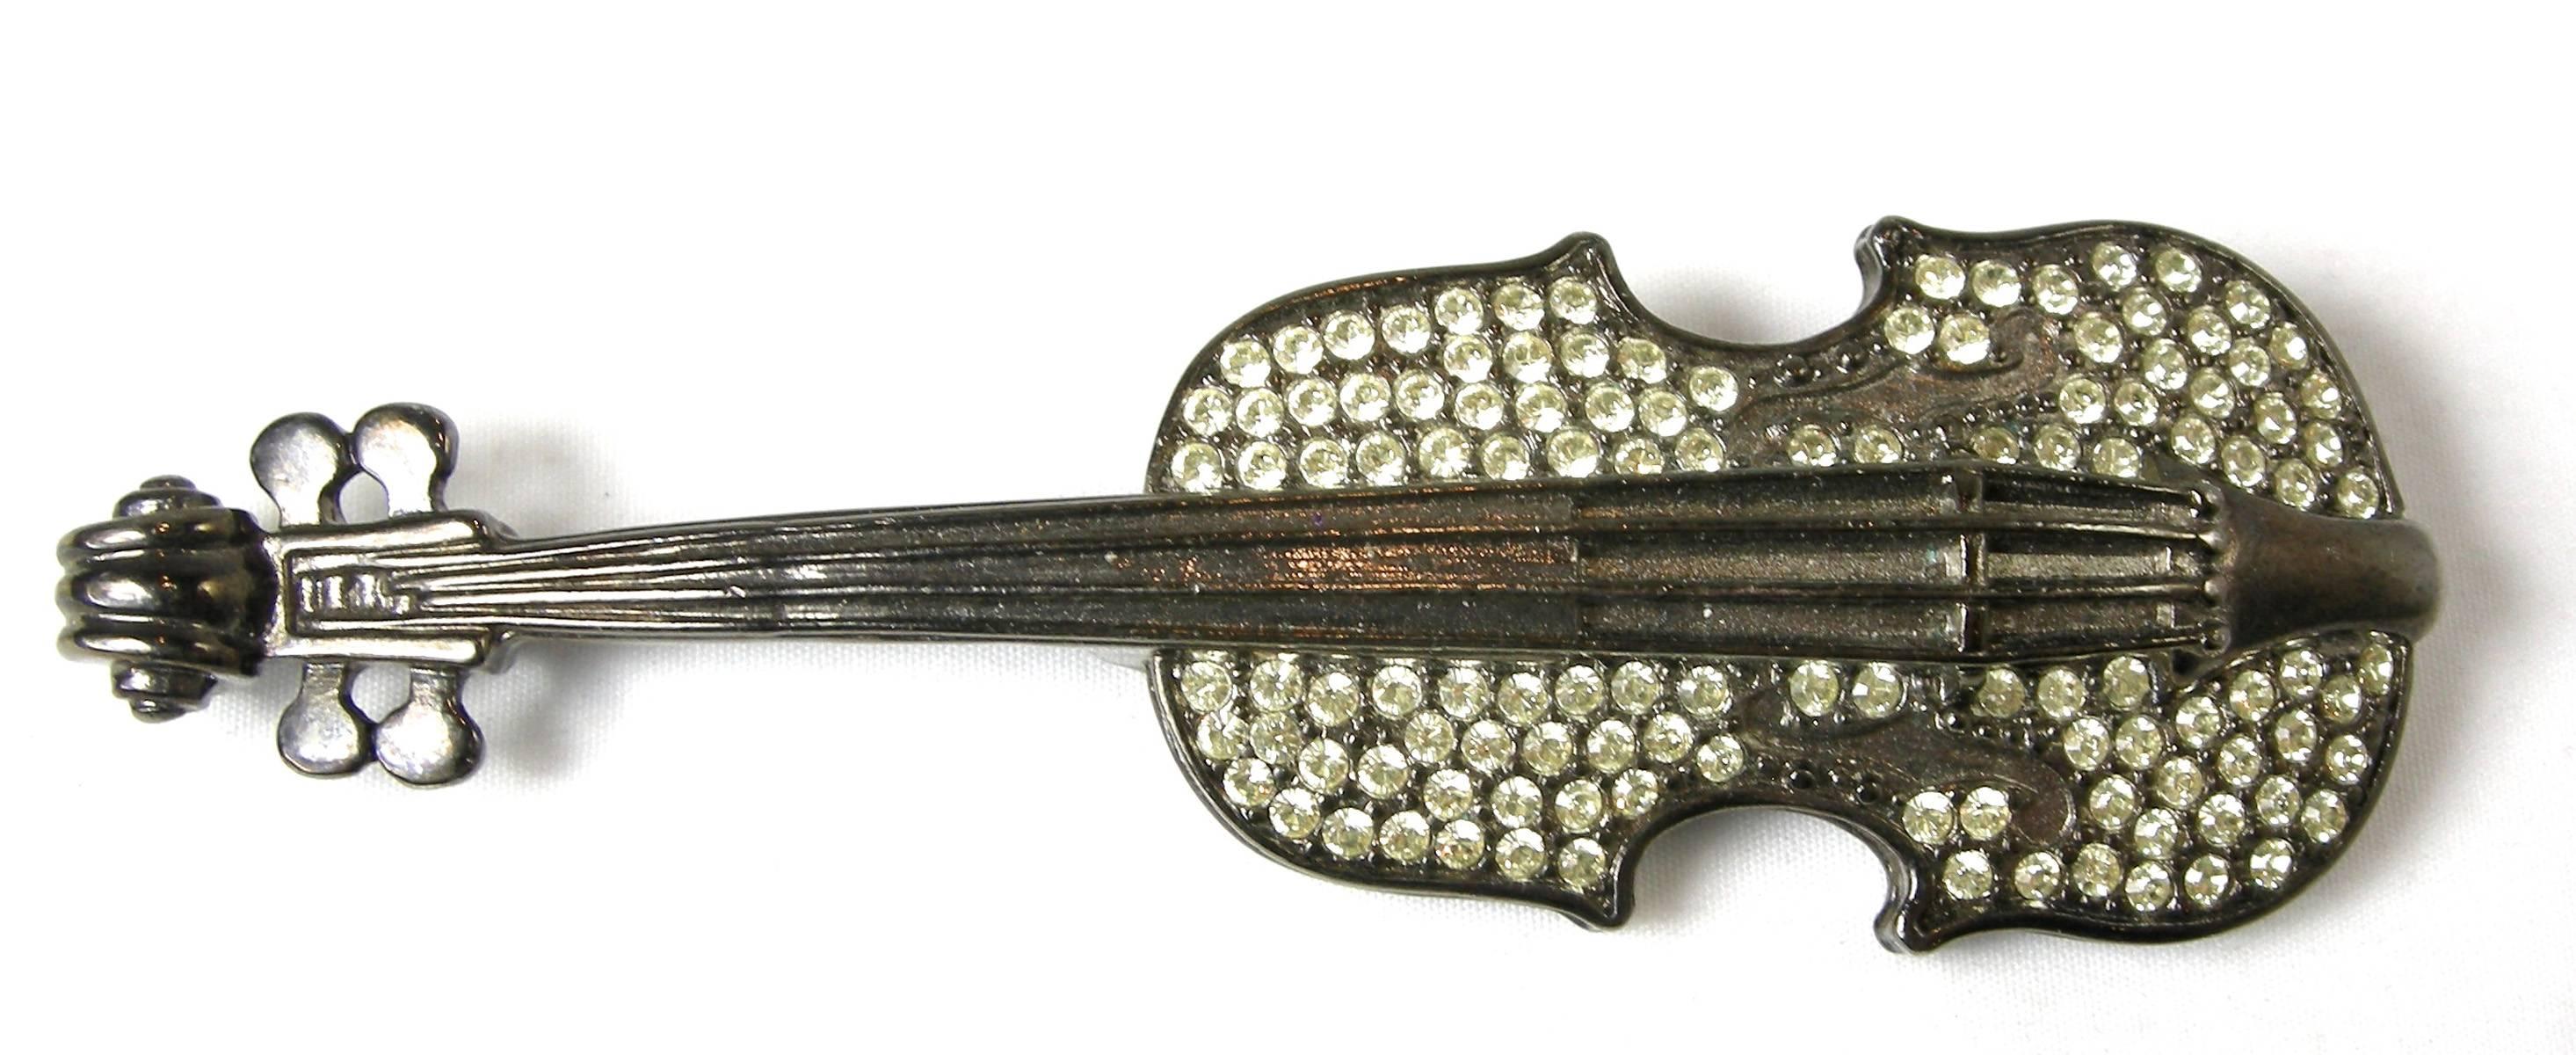 This 1970s rare and famous brooch was designed by Givenchy and features a violin studded with beautiful rhinestones in a gunmetal setting. It measures 4” x 1-1/2” and is signed “Givenchy” with the famous logo. It is in excellent condition.